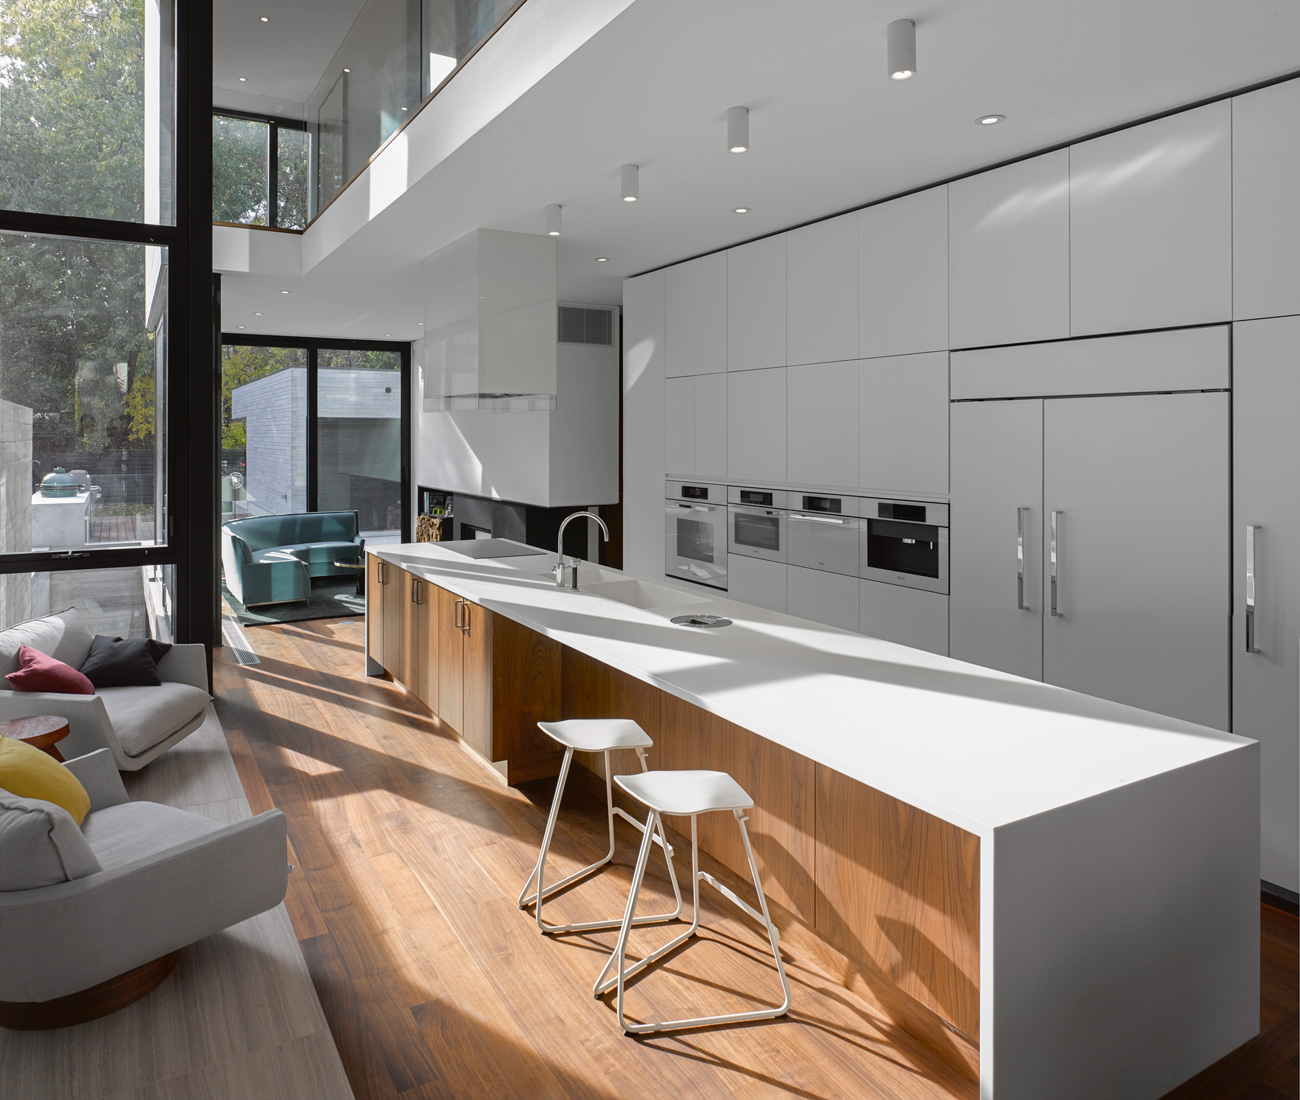 Walnut flooring and built-ins warm the cool interior. Lacquered cabinetry by O’Sullivan Millwork houses Miele’s Brilliant White appliances; the five-metre-long island is topped in Corian. Photo by Ben Rahn /A-Frame.